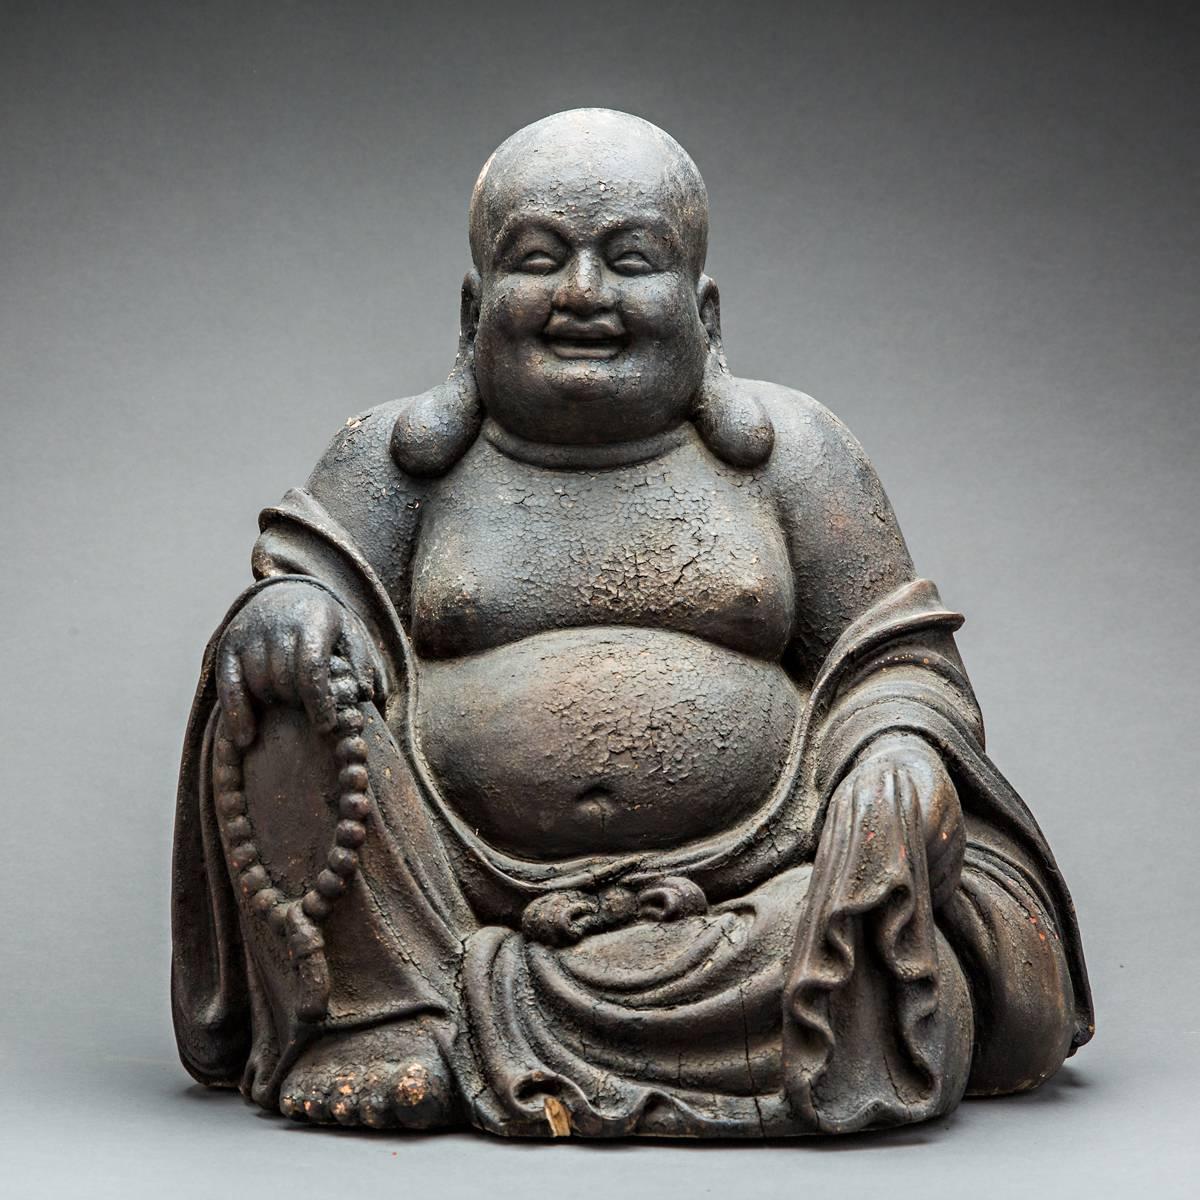 This rotund Buddha has considerable religious and historical significance to Buddhists and historians alike, as it is based upon a series of genuine and mythical personages from Chinese and Buddhist history. It dates to the Ming Dynasty, which ruled